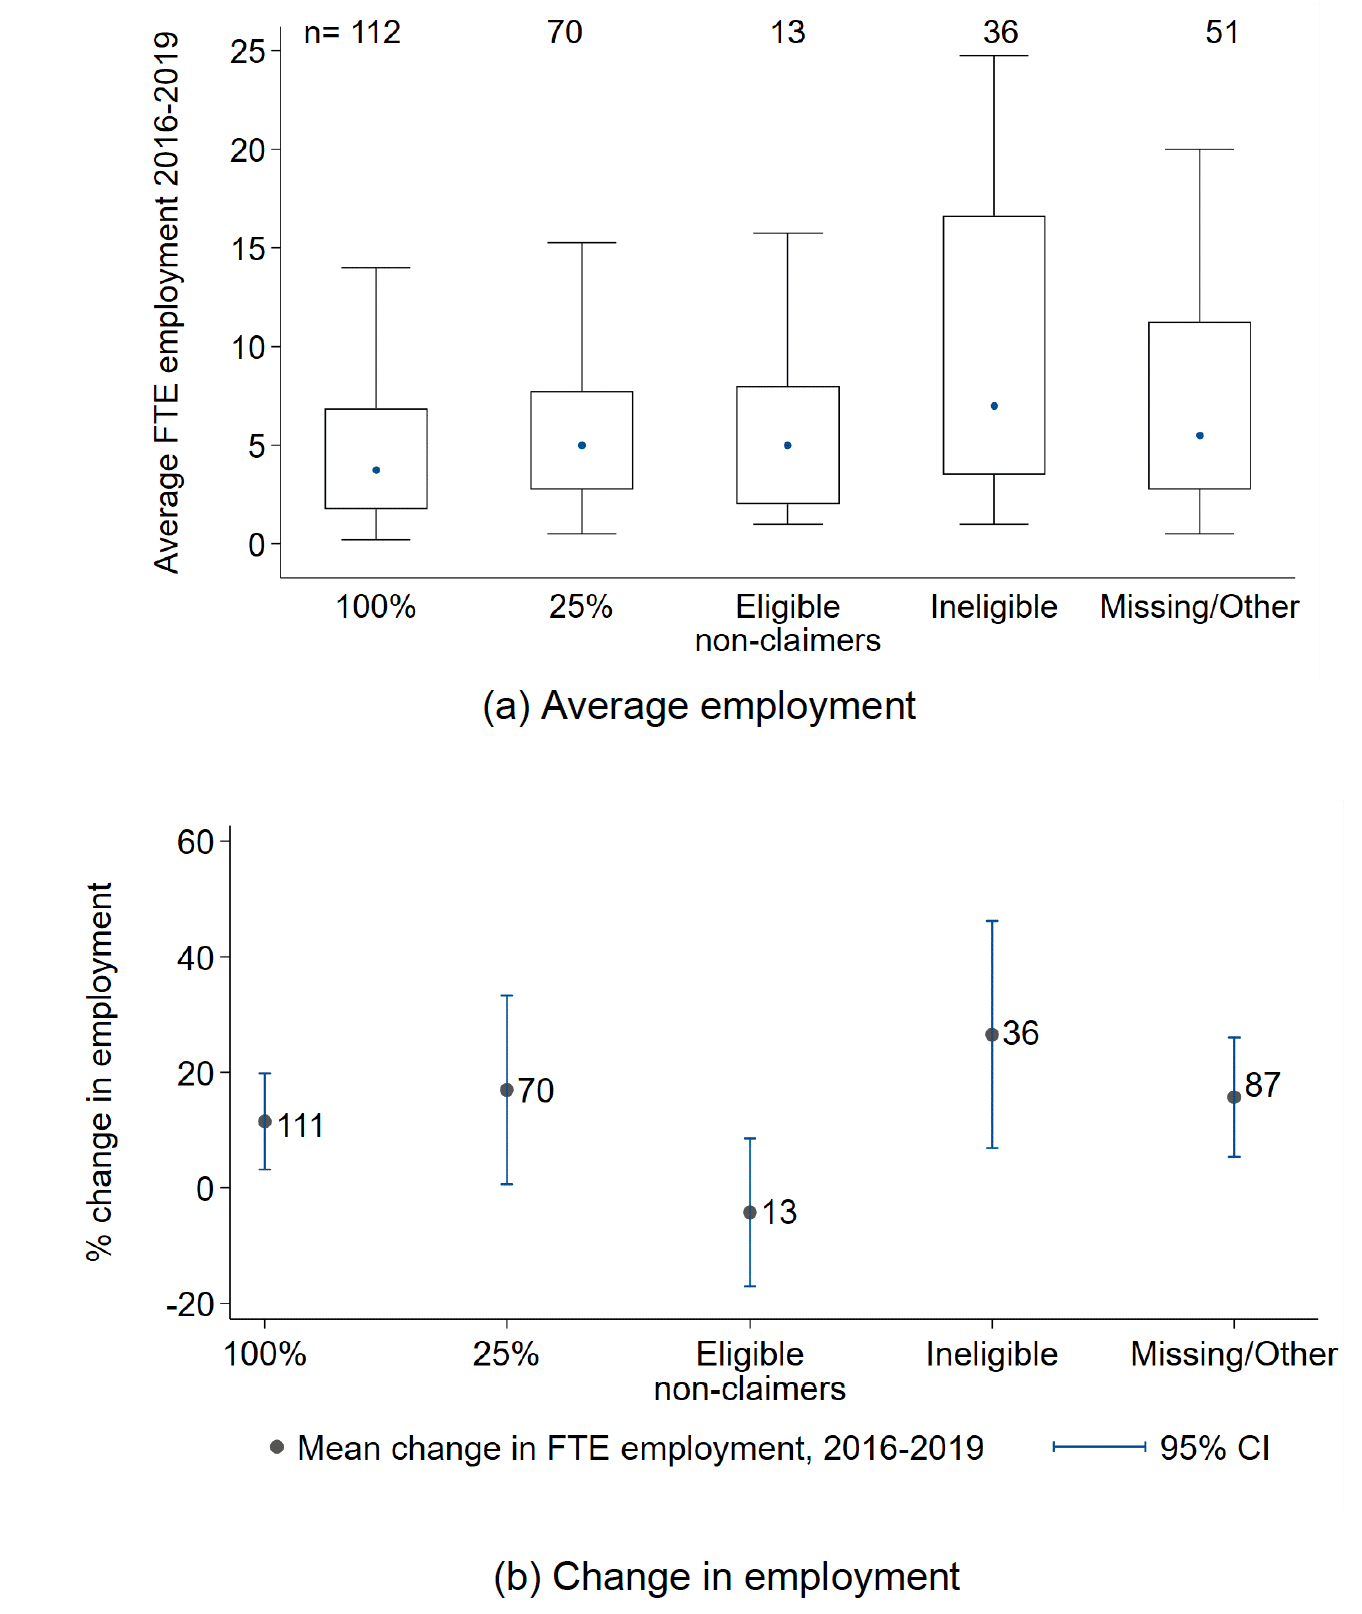 Two box and whisker plots show the mean and distribution of employment and percentage change in employment between 2016 and 2019 for each sample category.